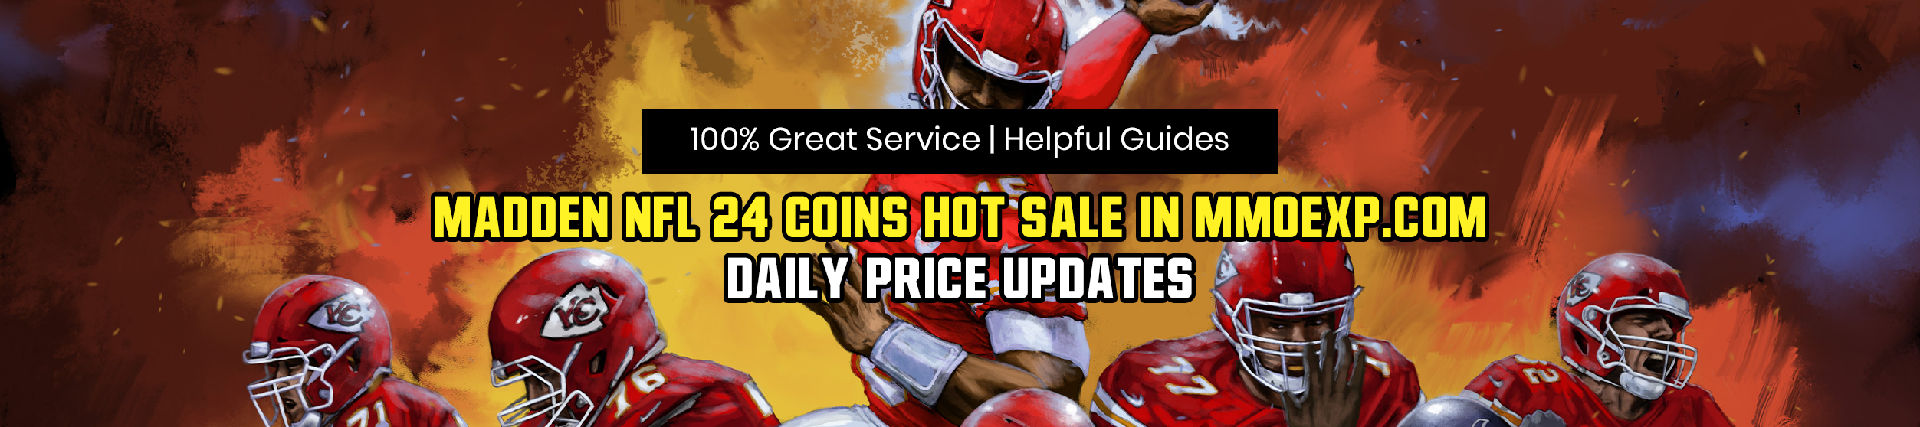 100% Great Service | Helpful Guides Madden NFL 24 